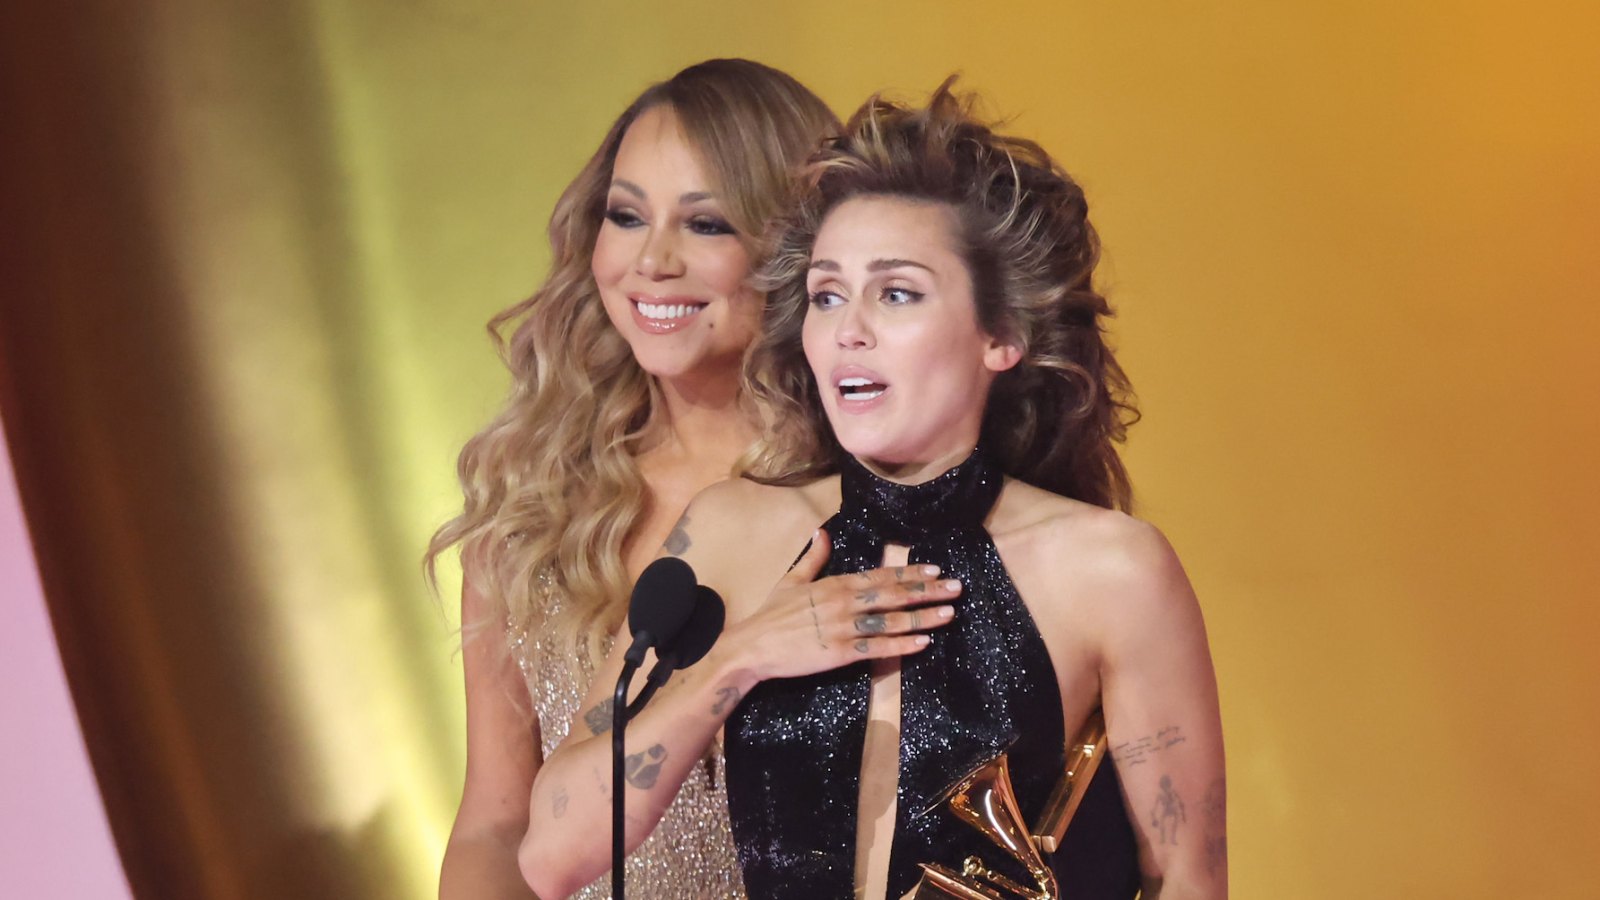 Miley Cyrus Is in Total Awe of Mariah Carey While Receiving Her 1st Grammy Award